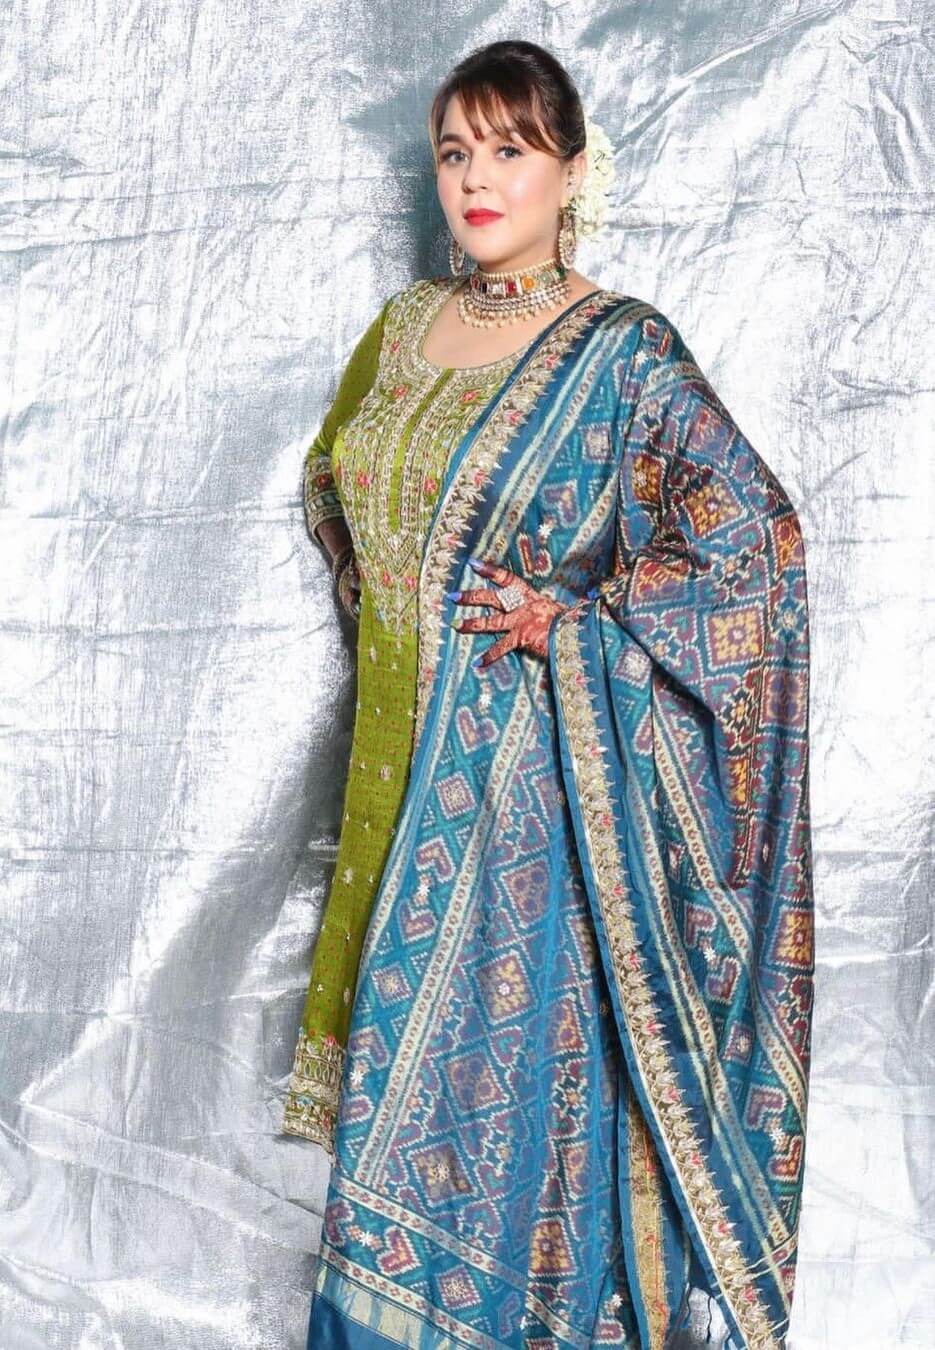 Lovely Ginni Chatrath In Green Embellished Suit With Printed Silk Dupatta